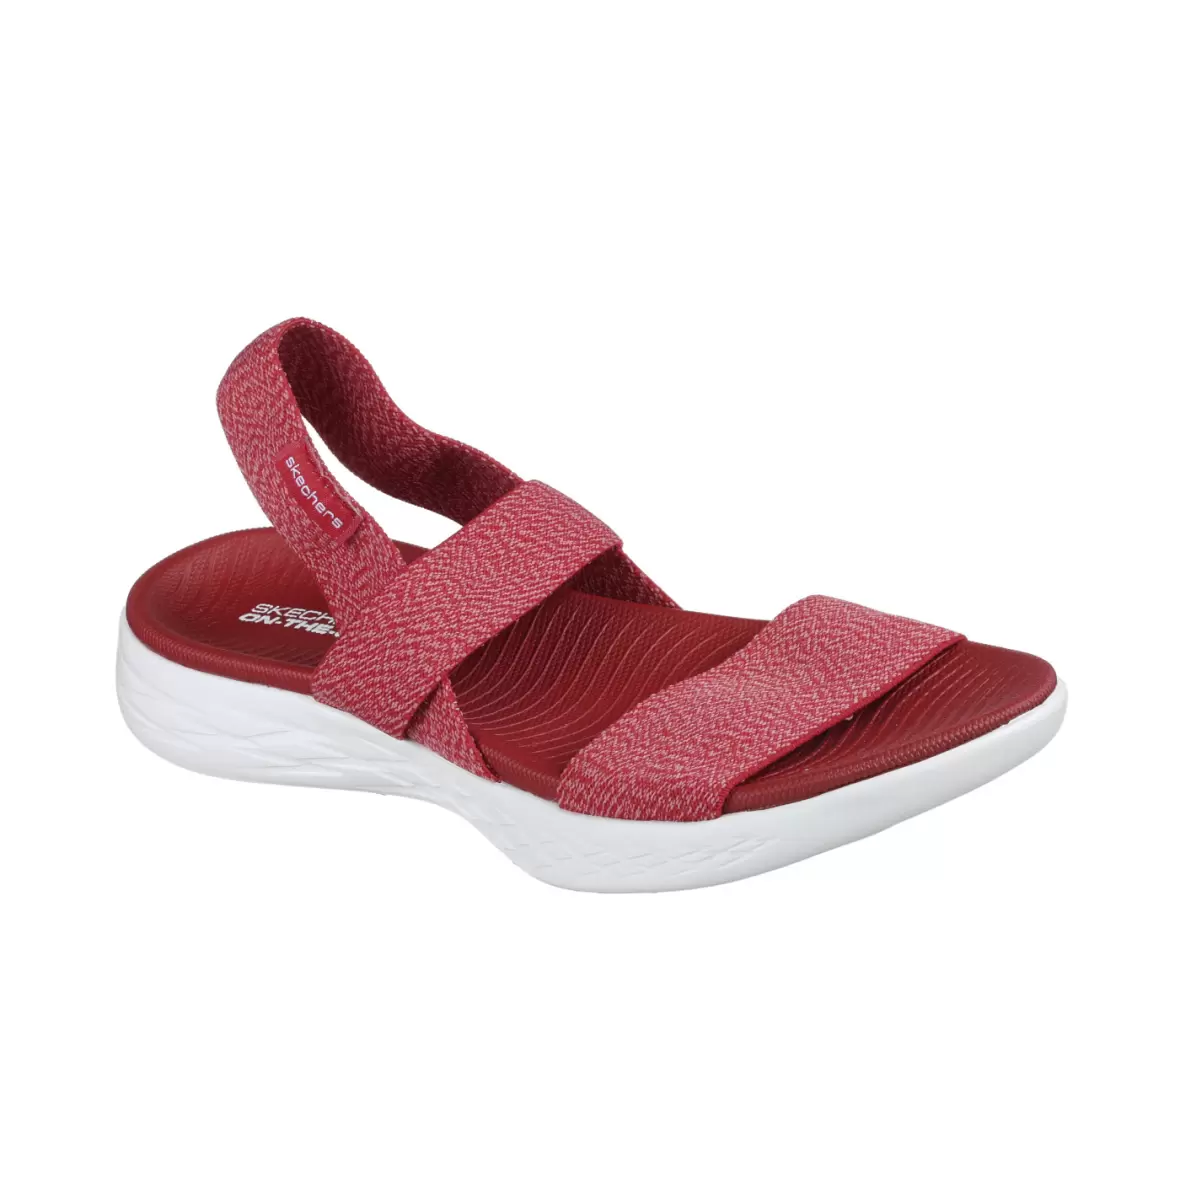 Skechers The 15310 RED Dame sandal